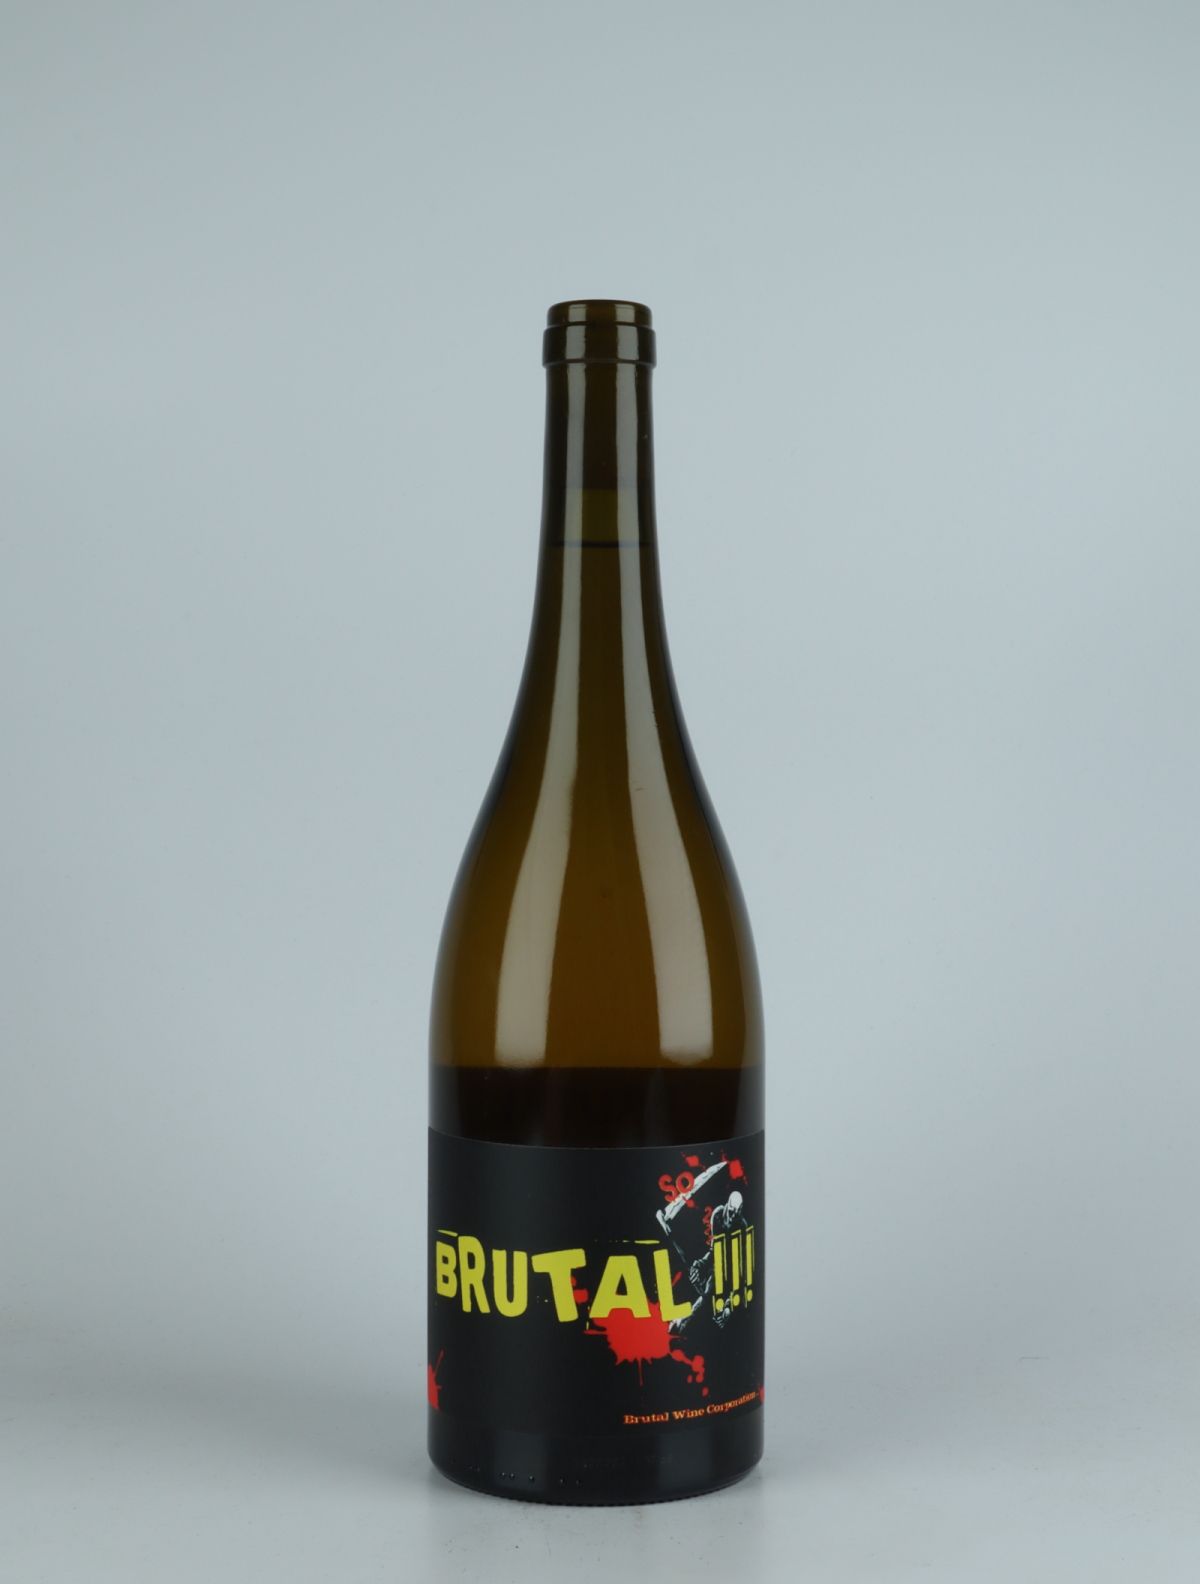 A bottle 2020 Brutal White wine from Don, Nelson in New Zealand